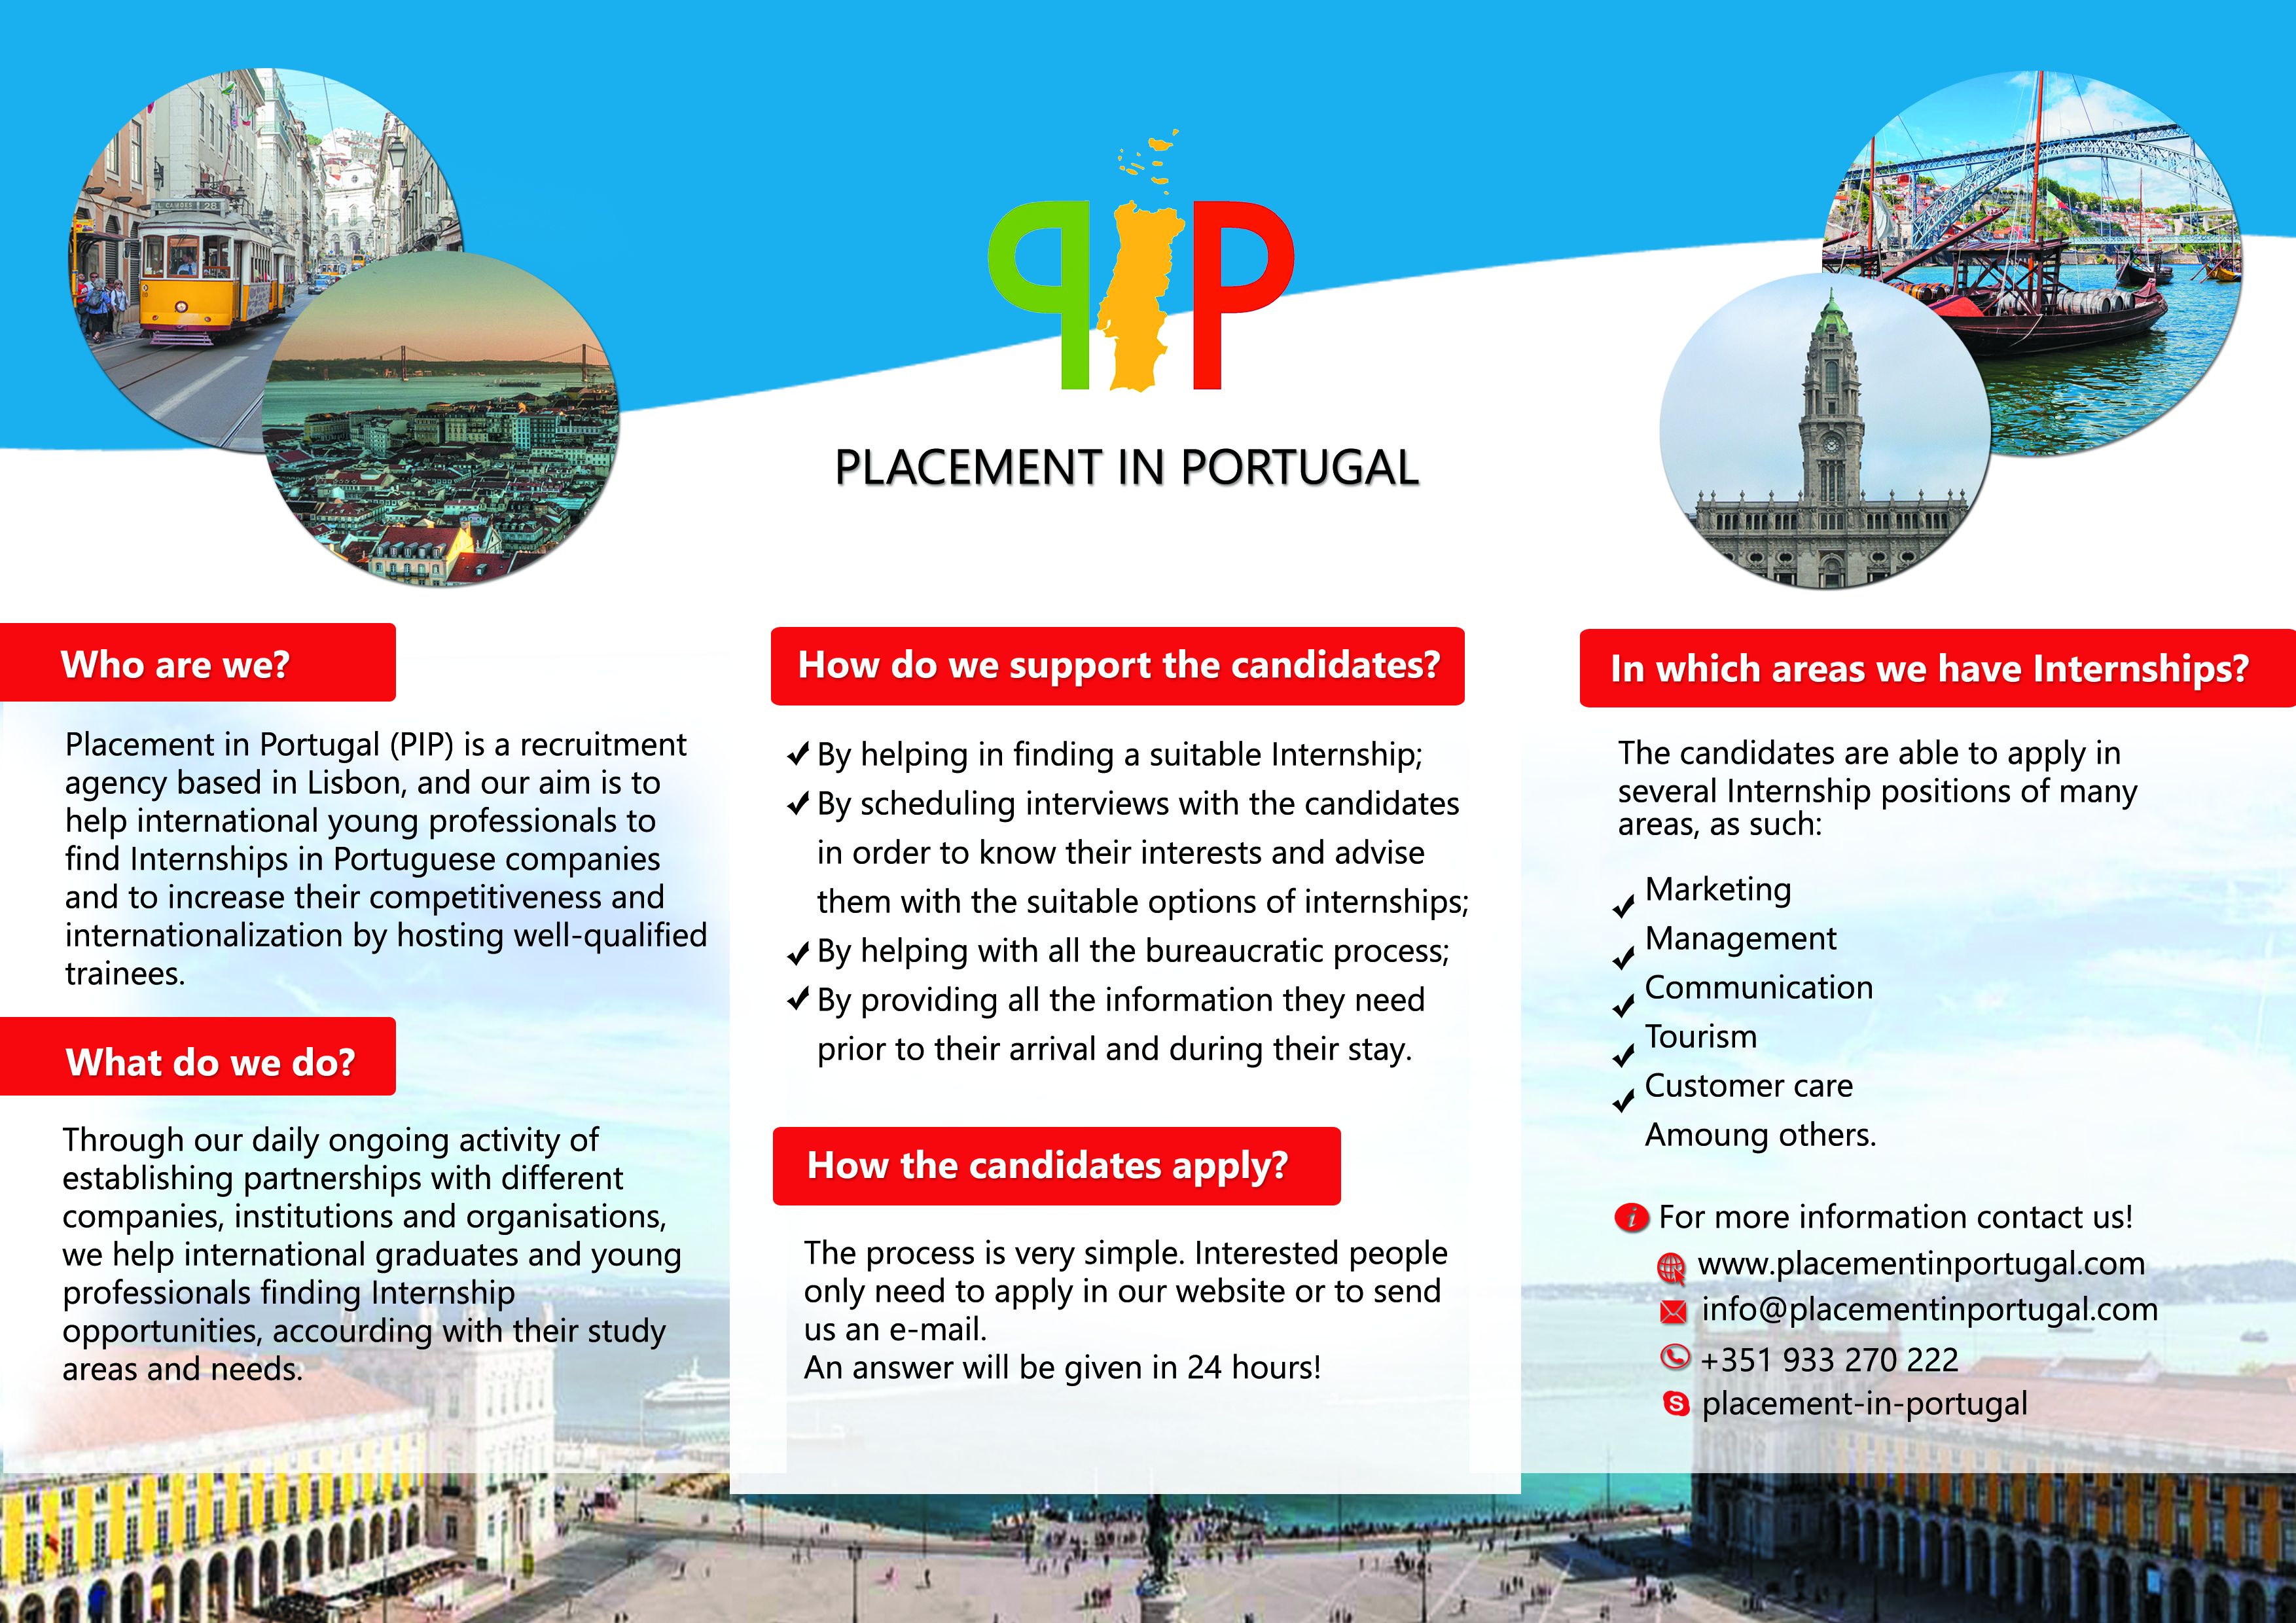 Placement in Portugal Information